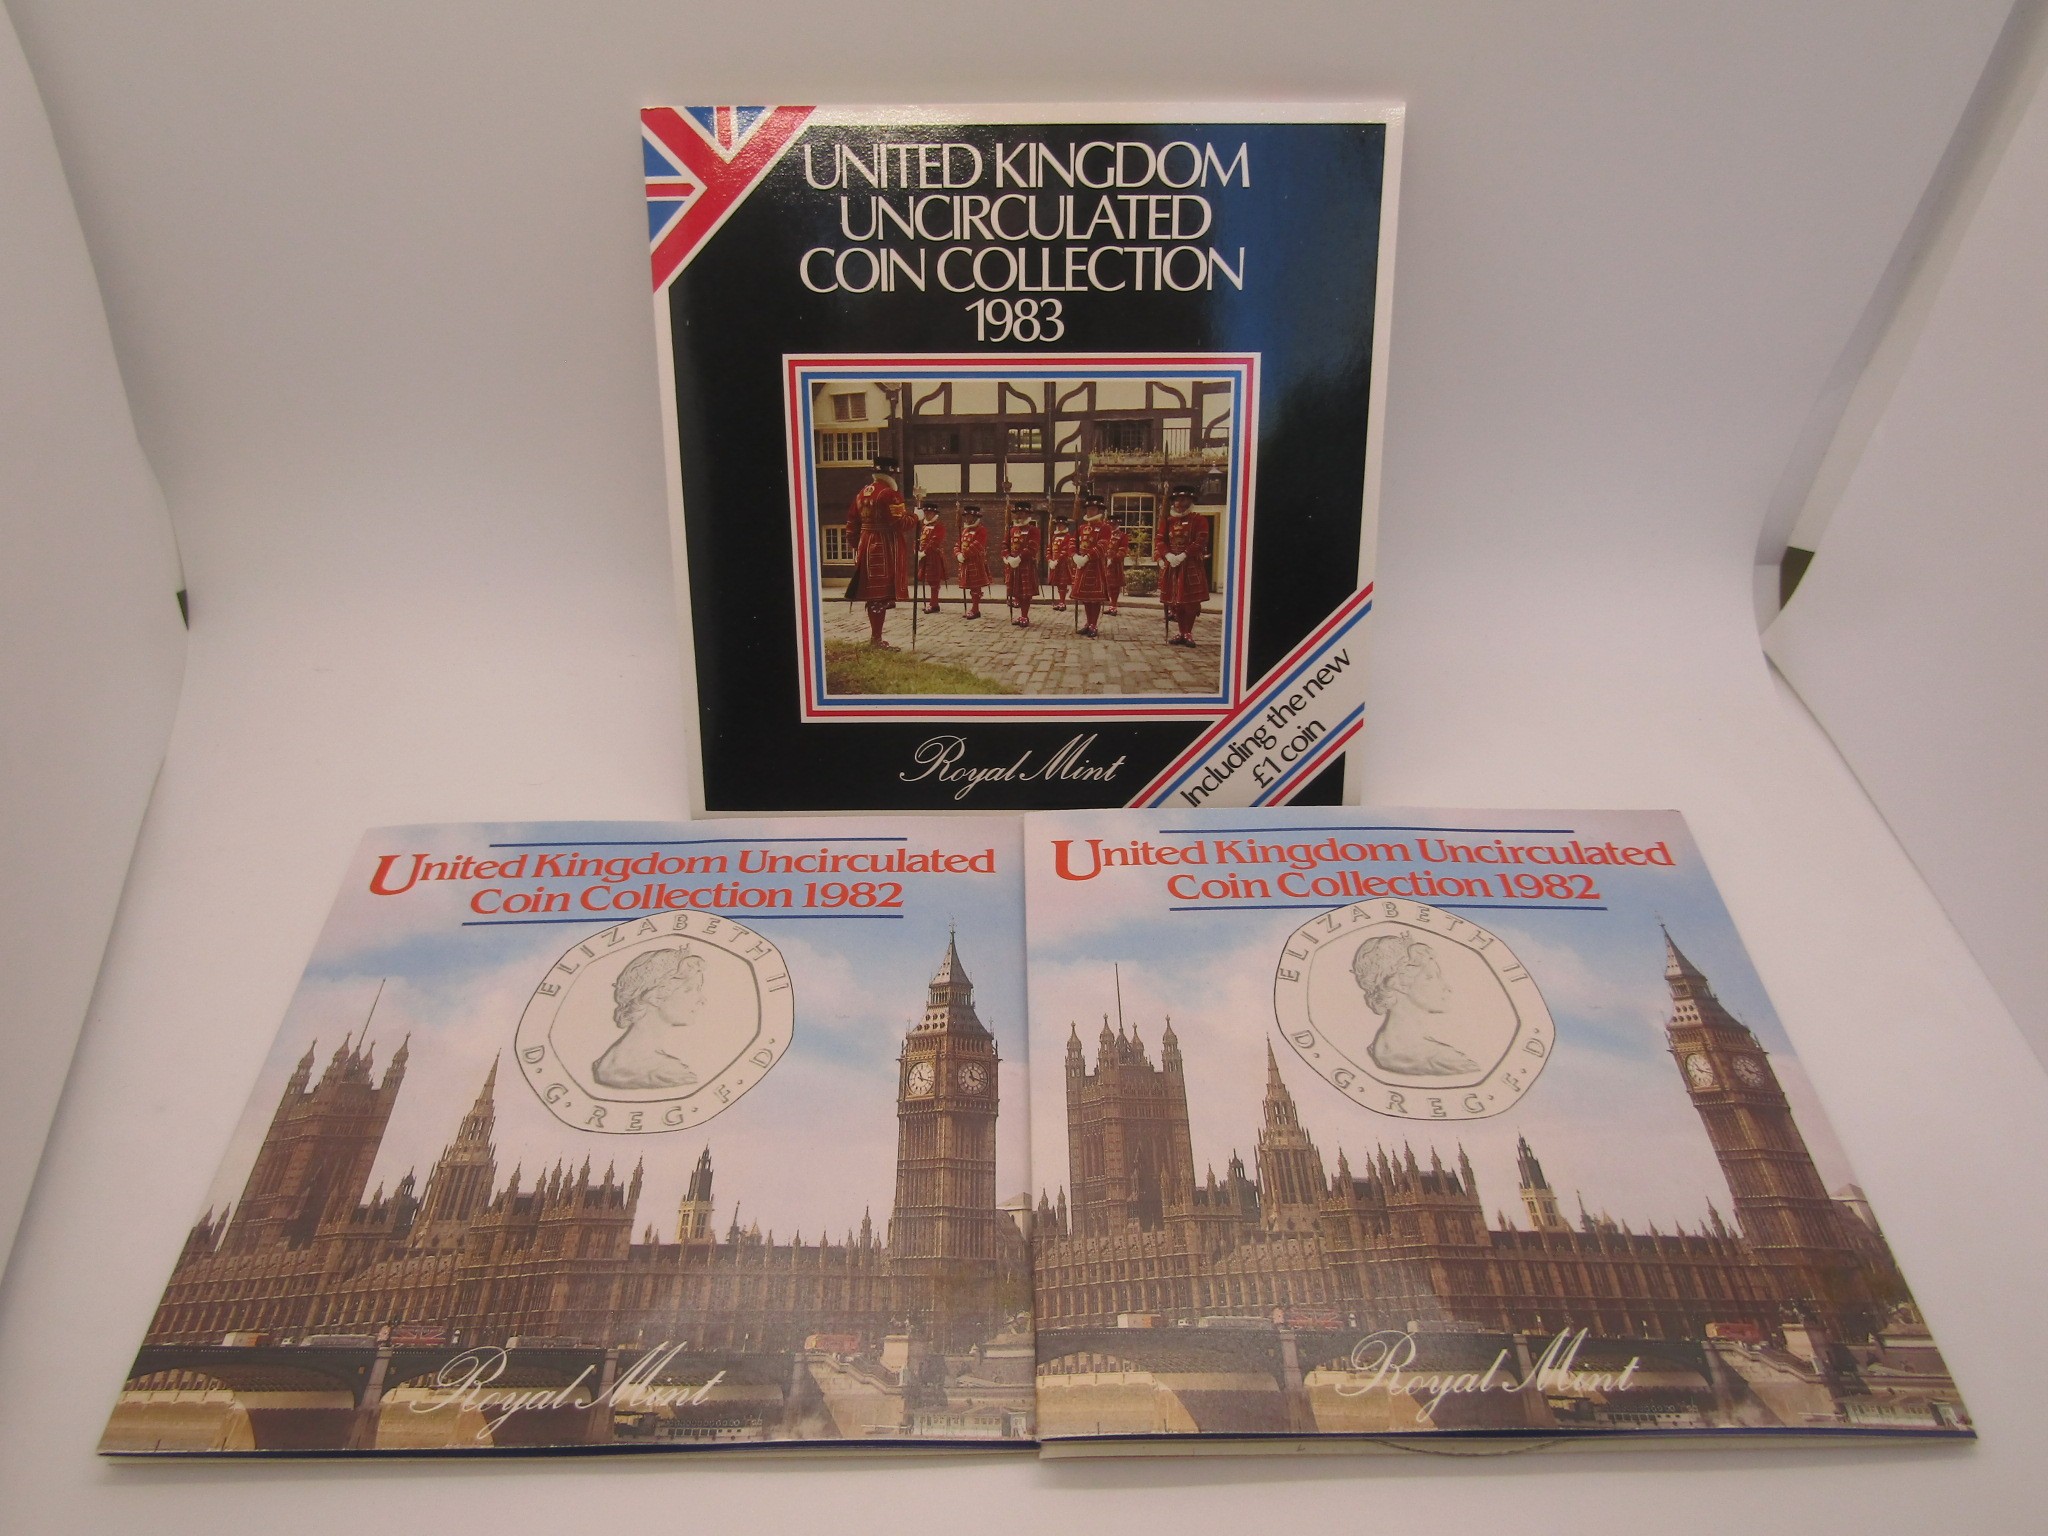 UK Brilliant uncirculated coin collections - 1982 x 2, 1983 x 3, 1984, 1985, 1986, 1987 - £1 - ½p - Image 2 of 3